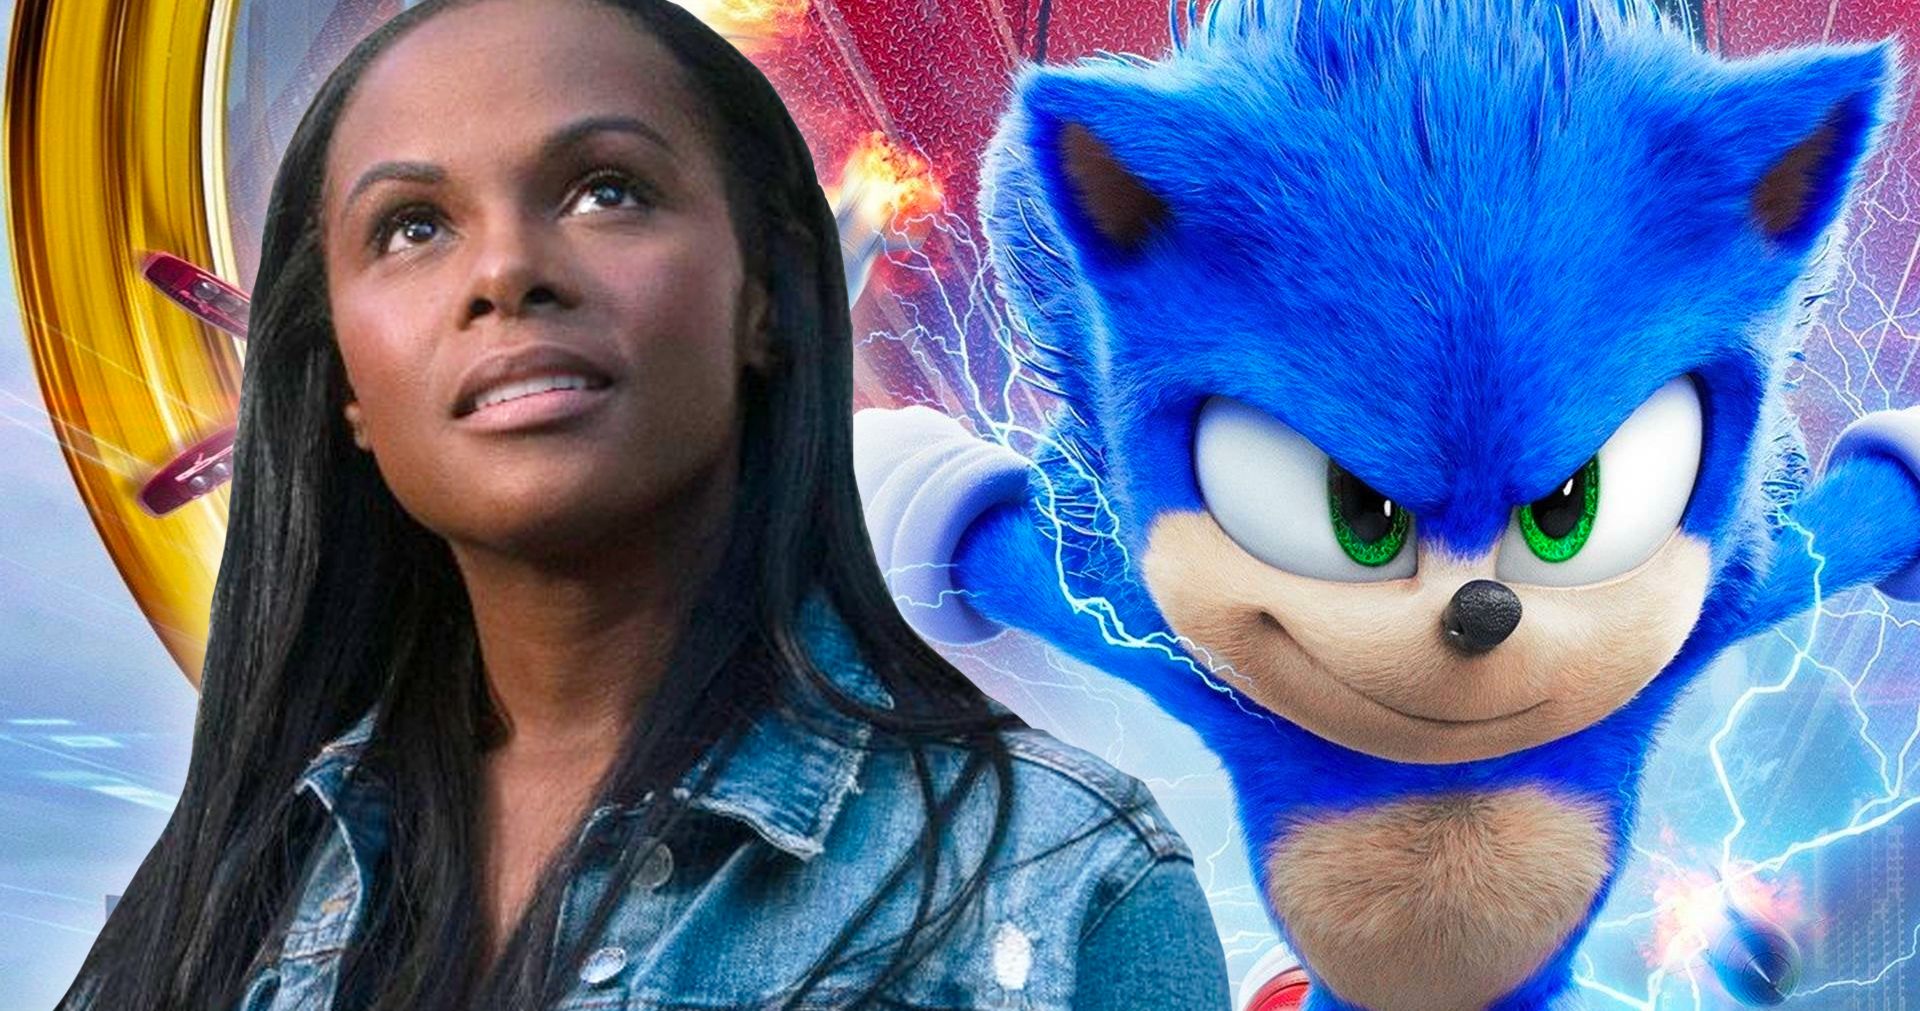 Sonic the Hedgehog Actress Tika Sumpter Talks Bringing the Video Game to Life [Exclusive]